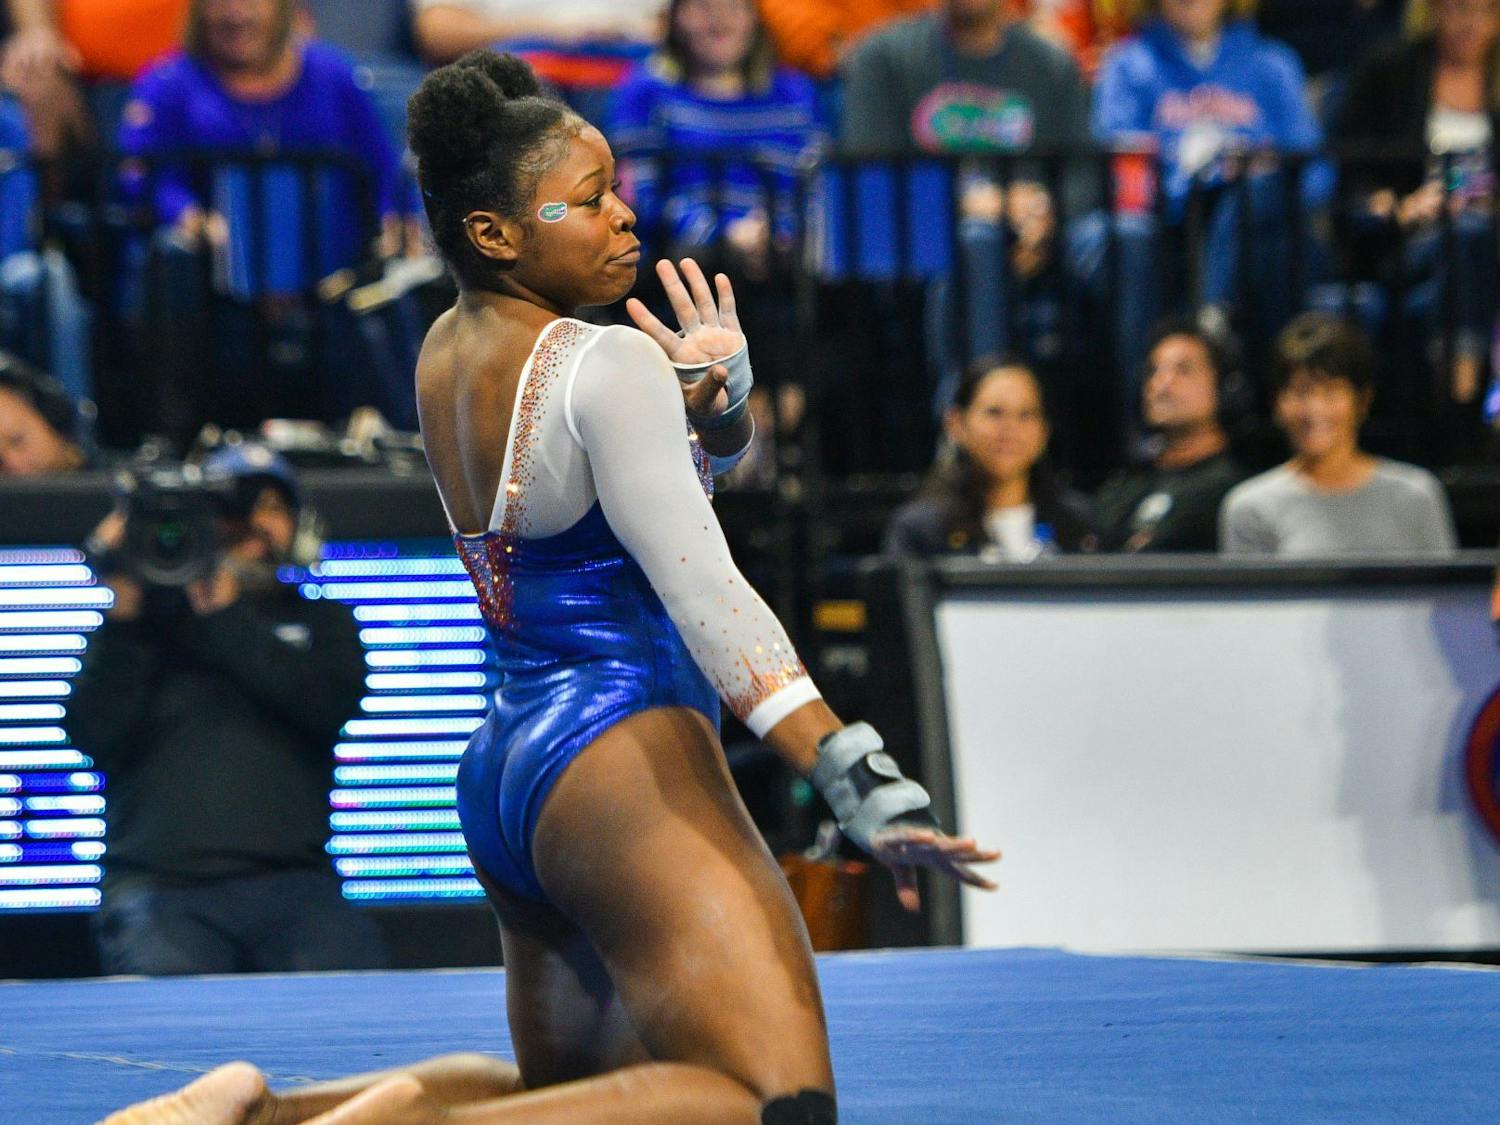 Senior Alicia Boren scored a 9.975 on her floor routine in the Gators'&nbsp;198.025-196.325 victory against the Penn State Nittany Lions on Senior Night.